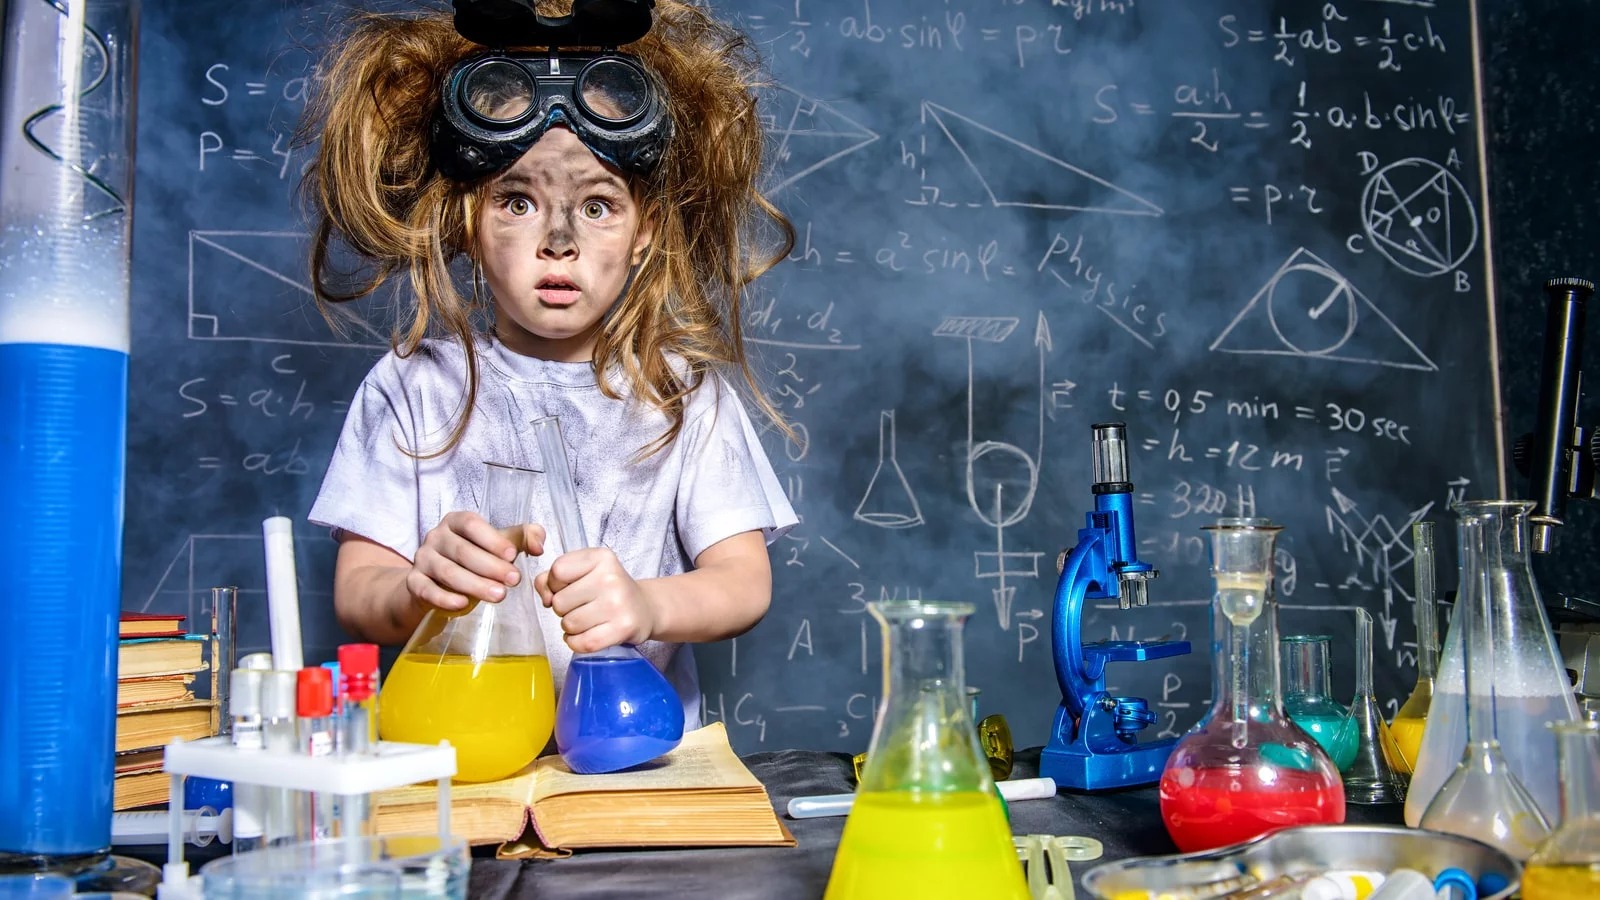 Elementary School Students Score Better Than Adults on This General Knowledge Quiz Kid Child Science Chemistry Failure